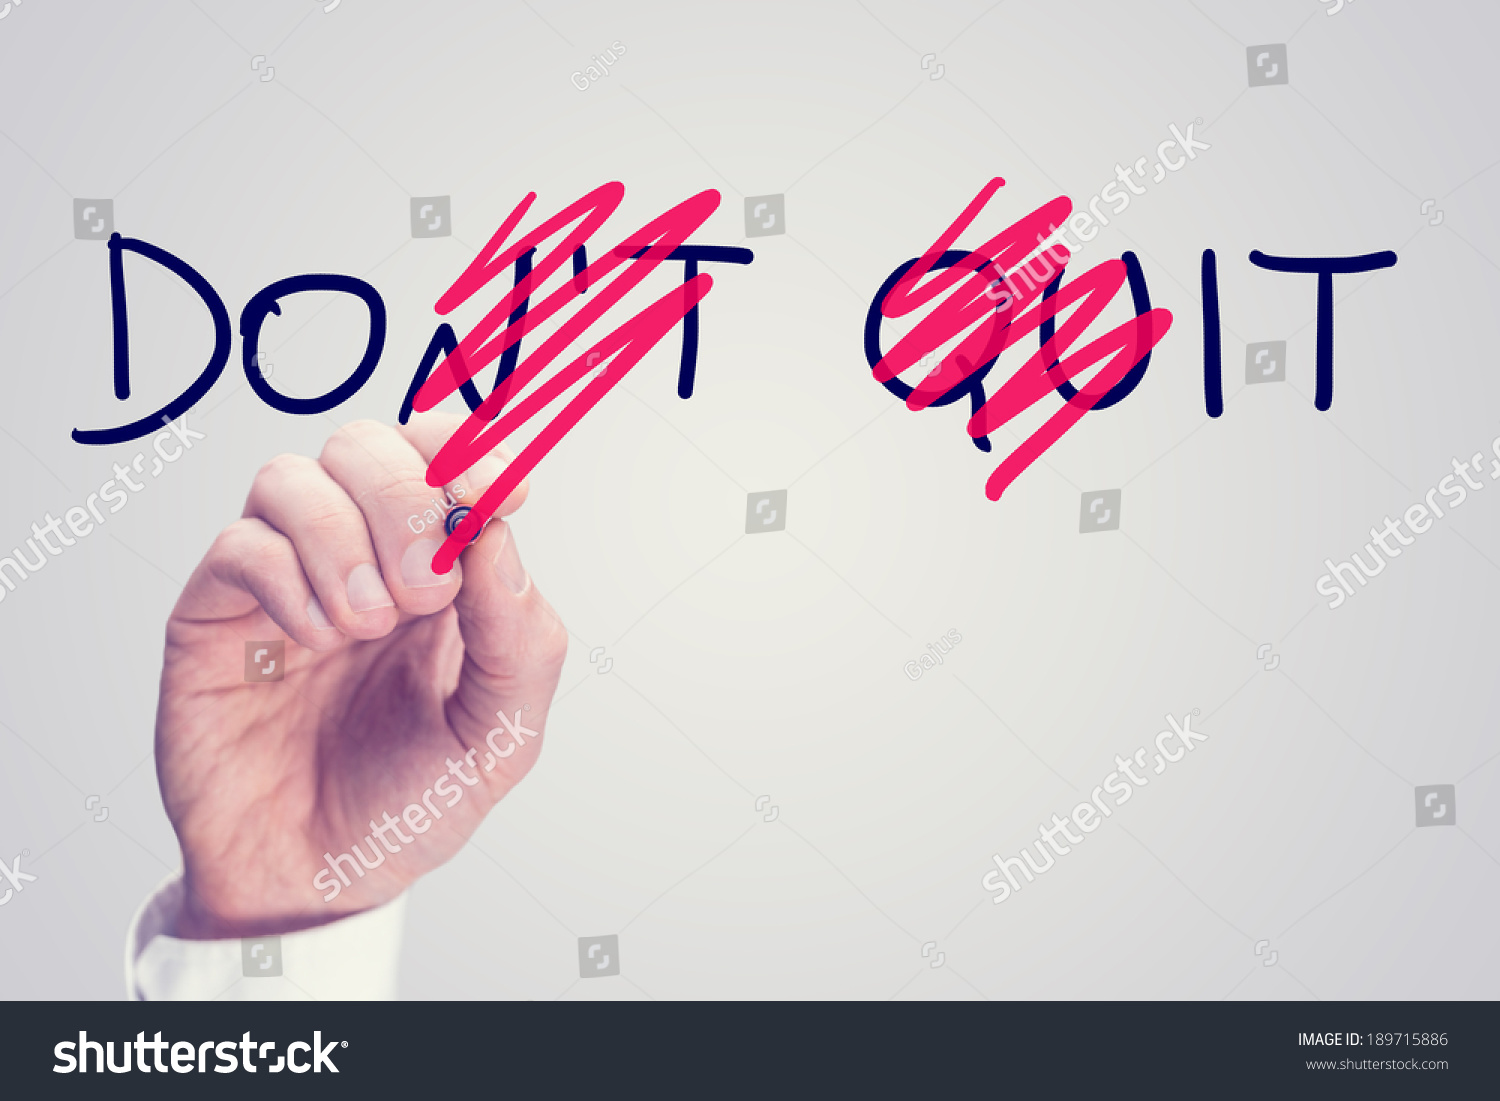 Don't Quit - Do It, conceptual image with a man scrubbing through letters in the words Don't Quit converting them to Do It with a red pen in a motivational message of hope and perseverance. #189715886